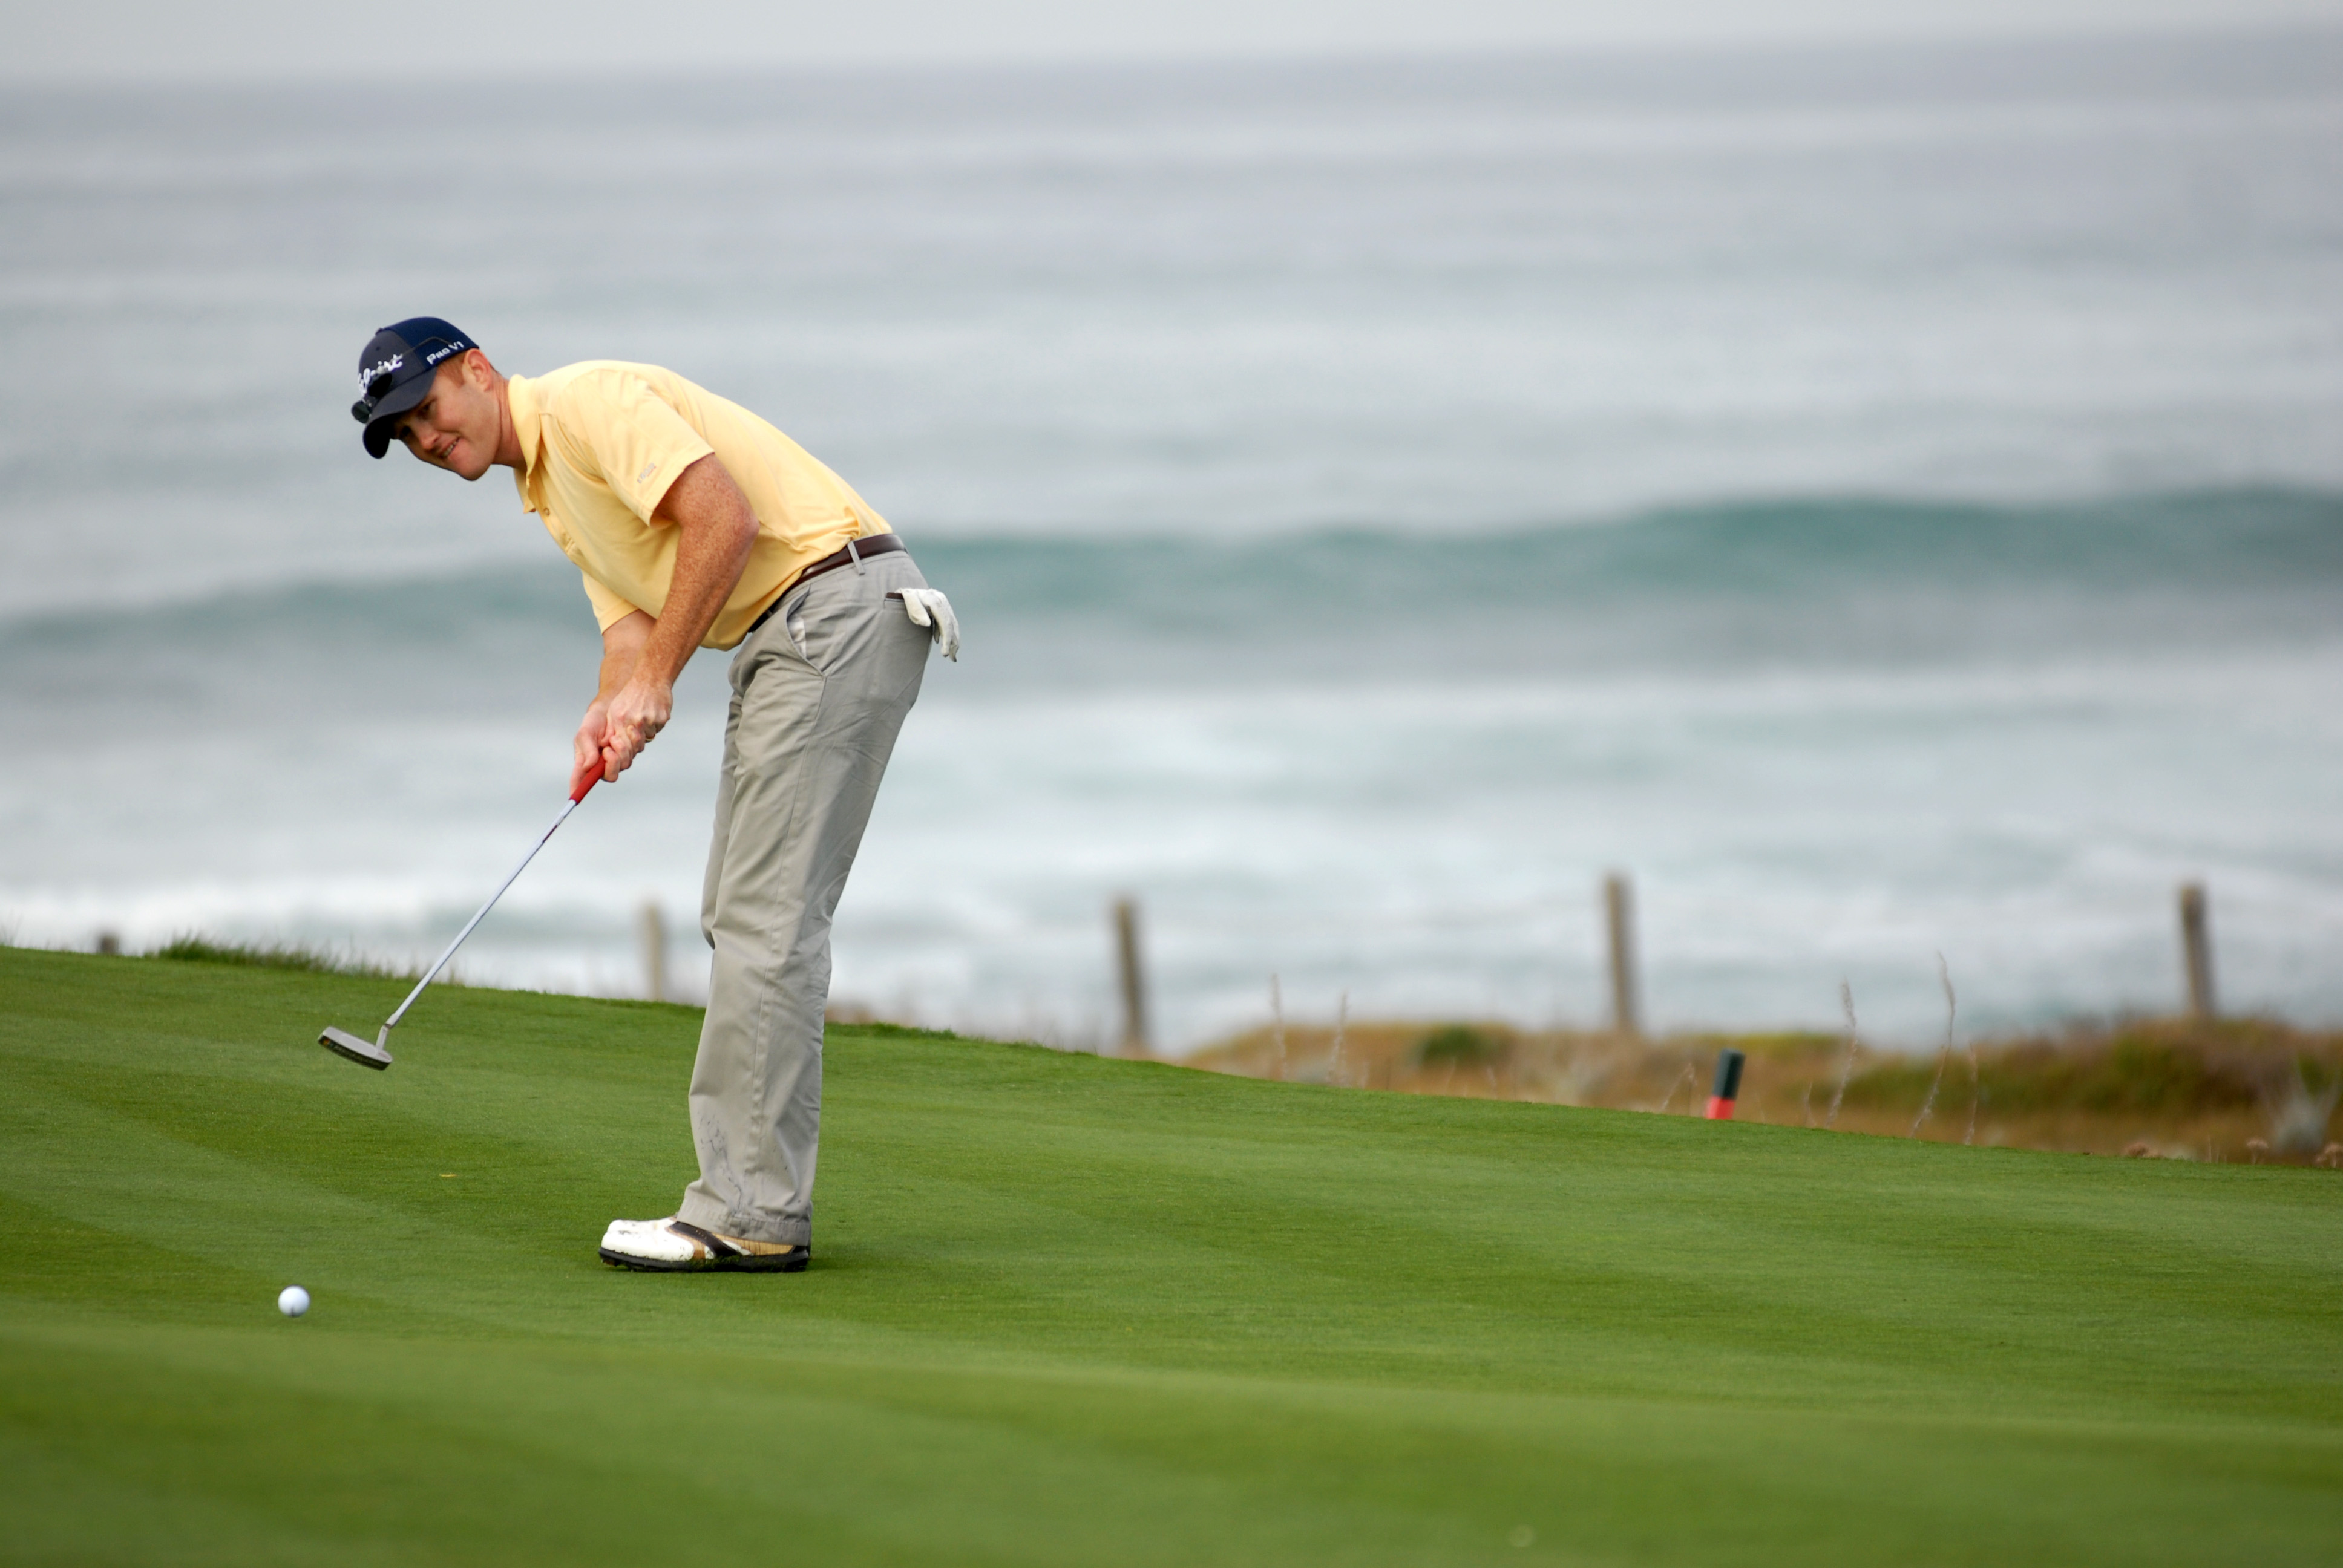 Golfer making putt by ocean on California course